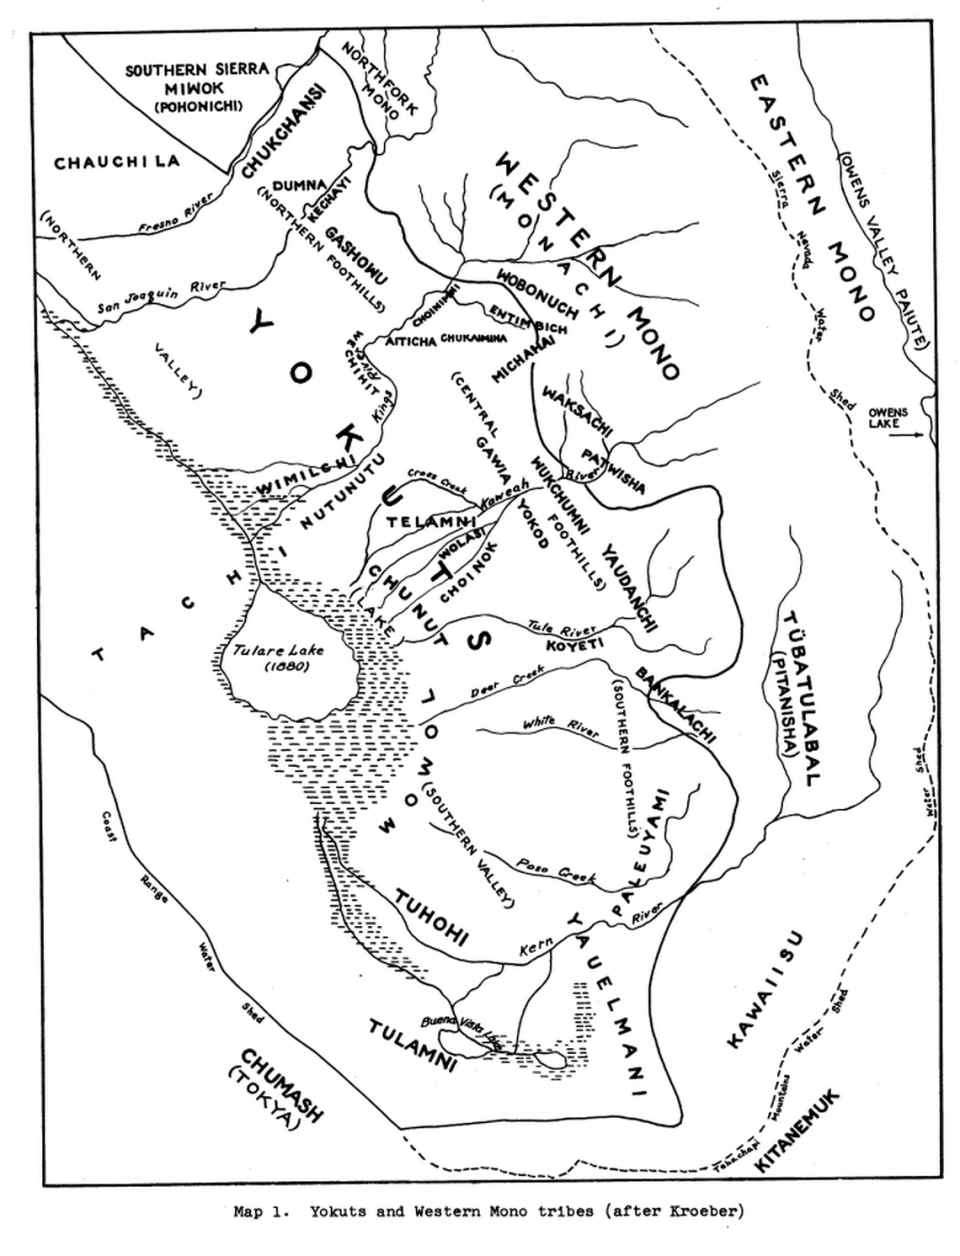 Screenshot of a map included in “Yokuts and Western Mono Ethnography I: Tulare Lake, Southern Valley, and Central Foothills Yokuts,” by anthropologist A.H. Gayton, published in 1948 by the University of California.